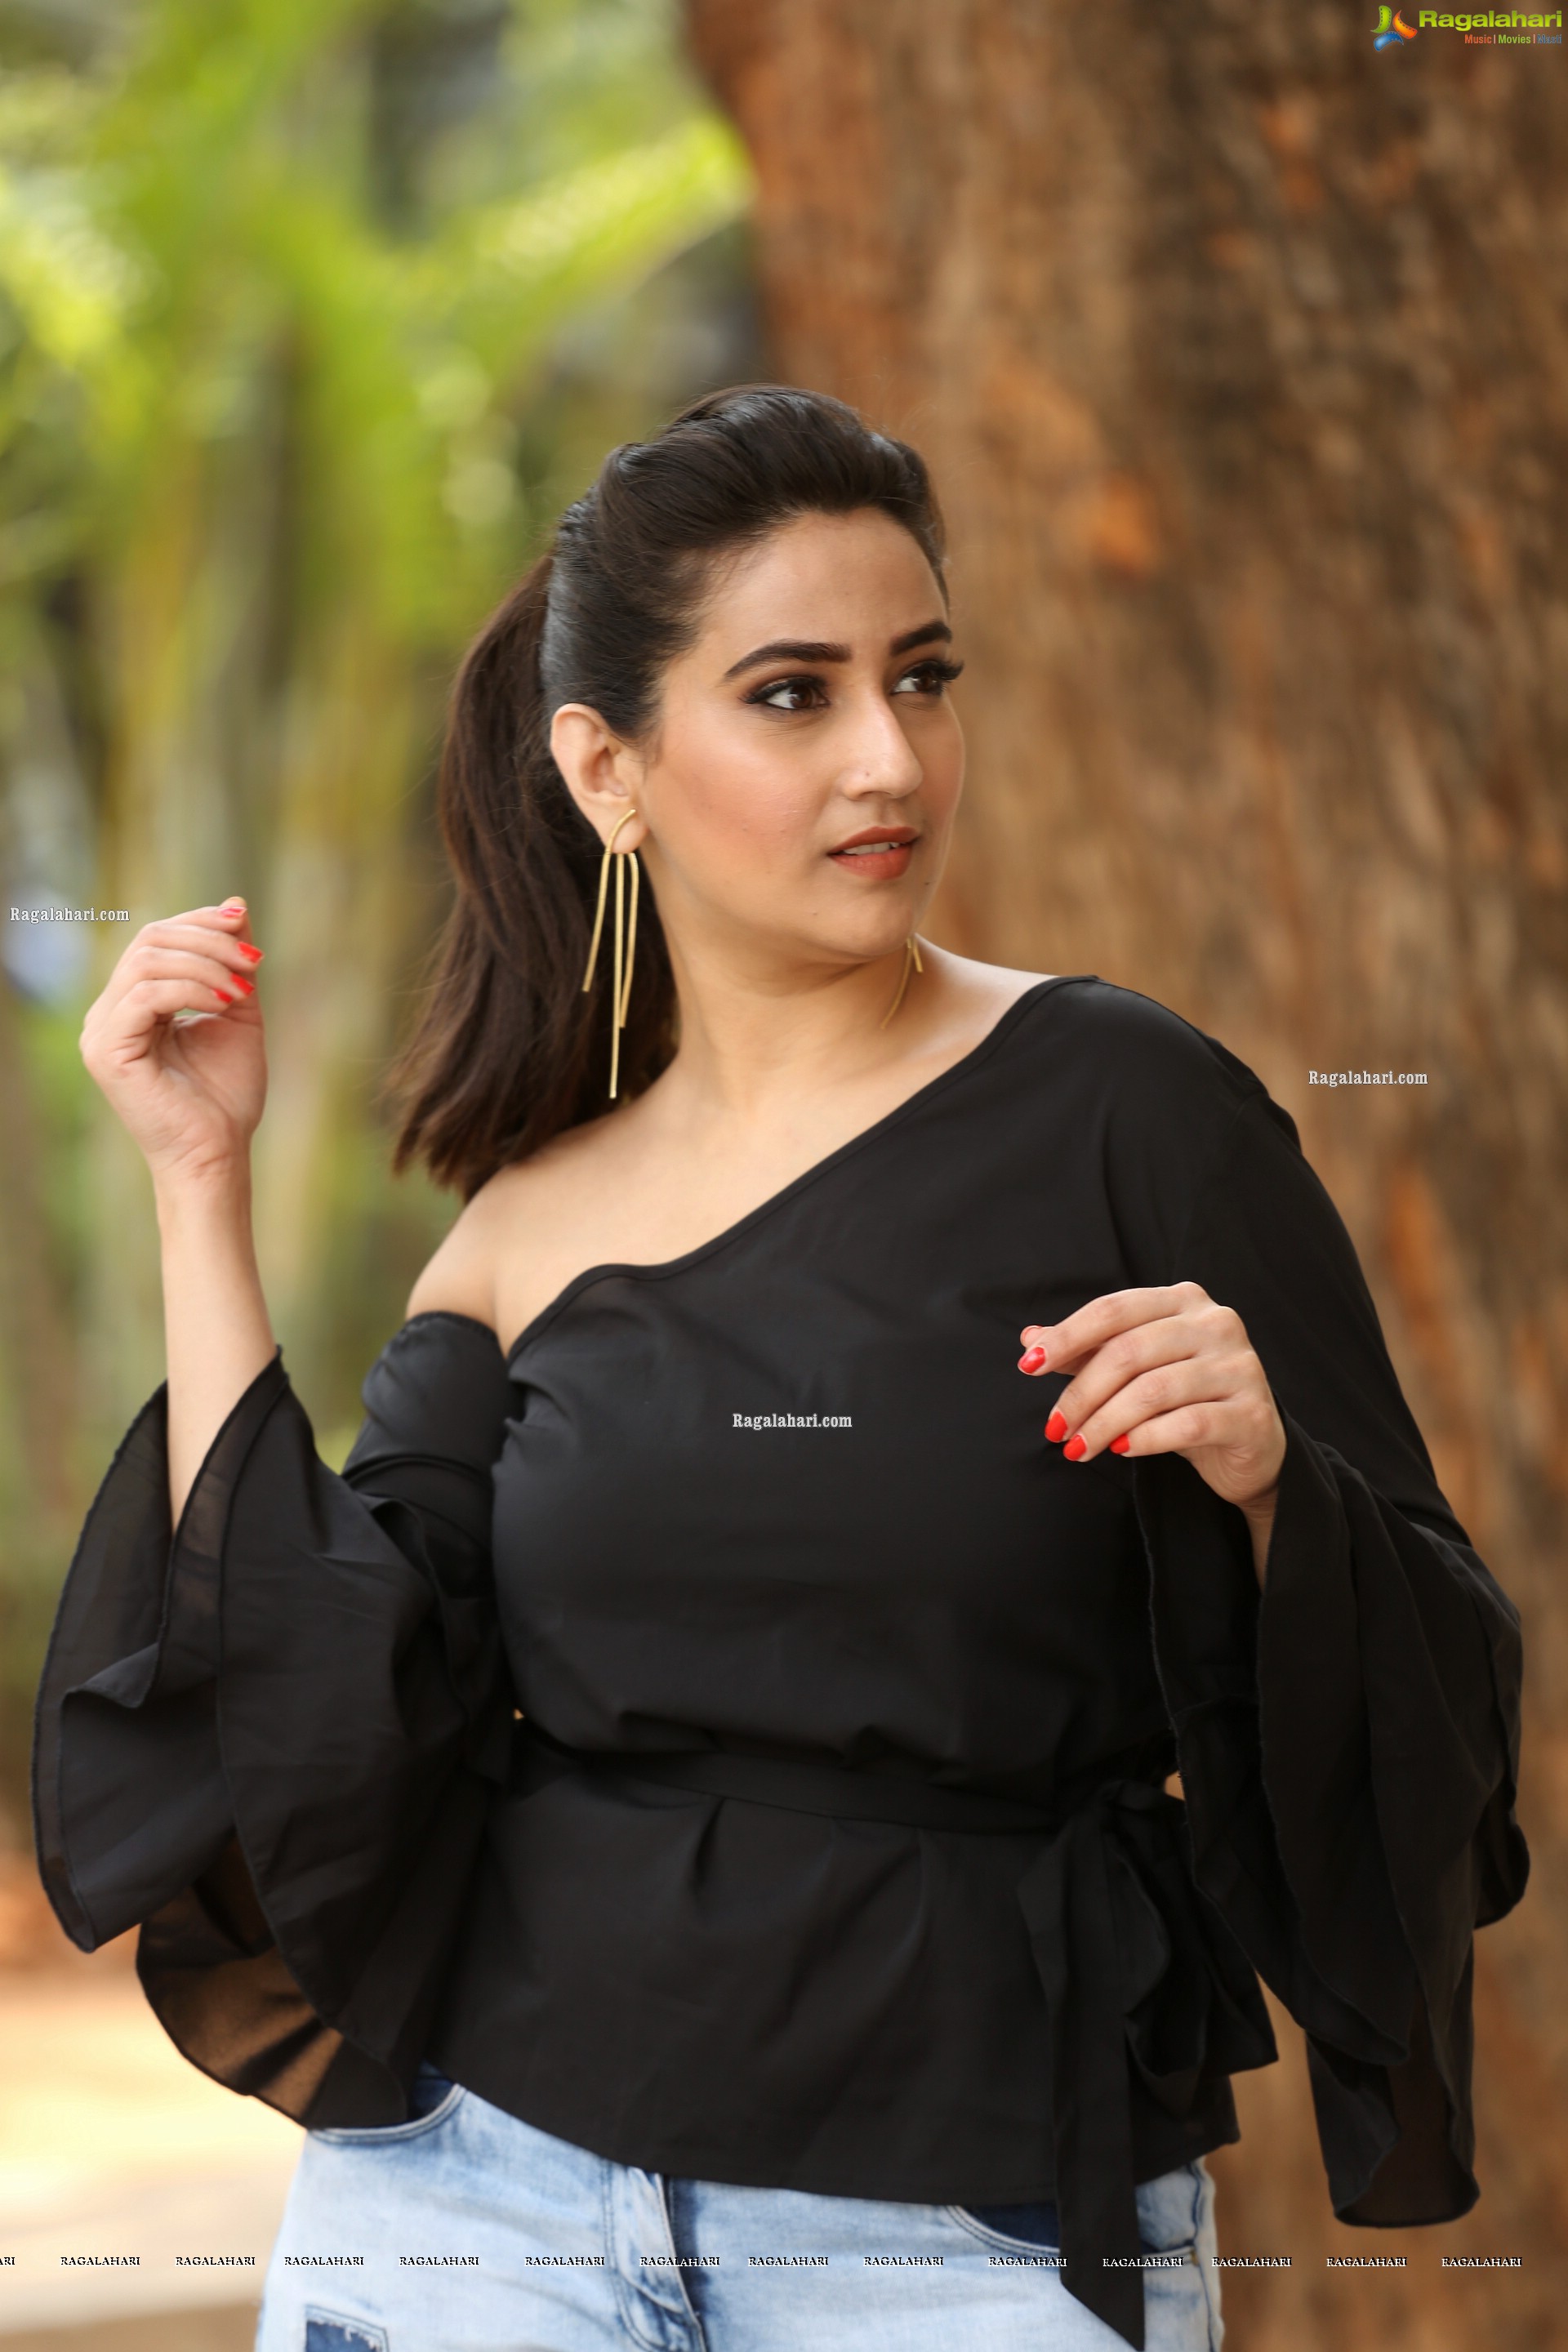 Manjusha in Black Ruffle One Shoulder Peplum Top With Tie Detail Exclusive Photo Shoot